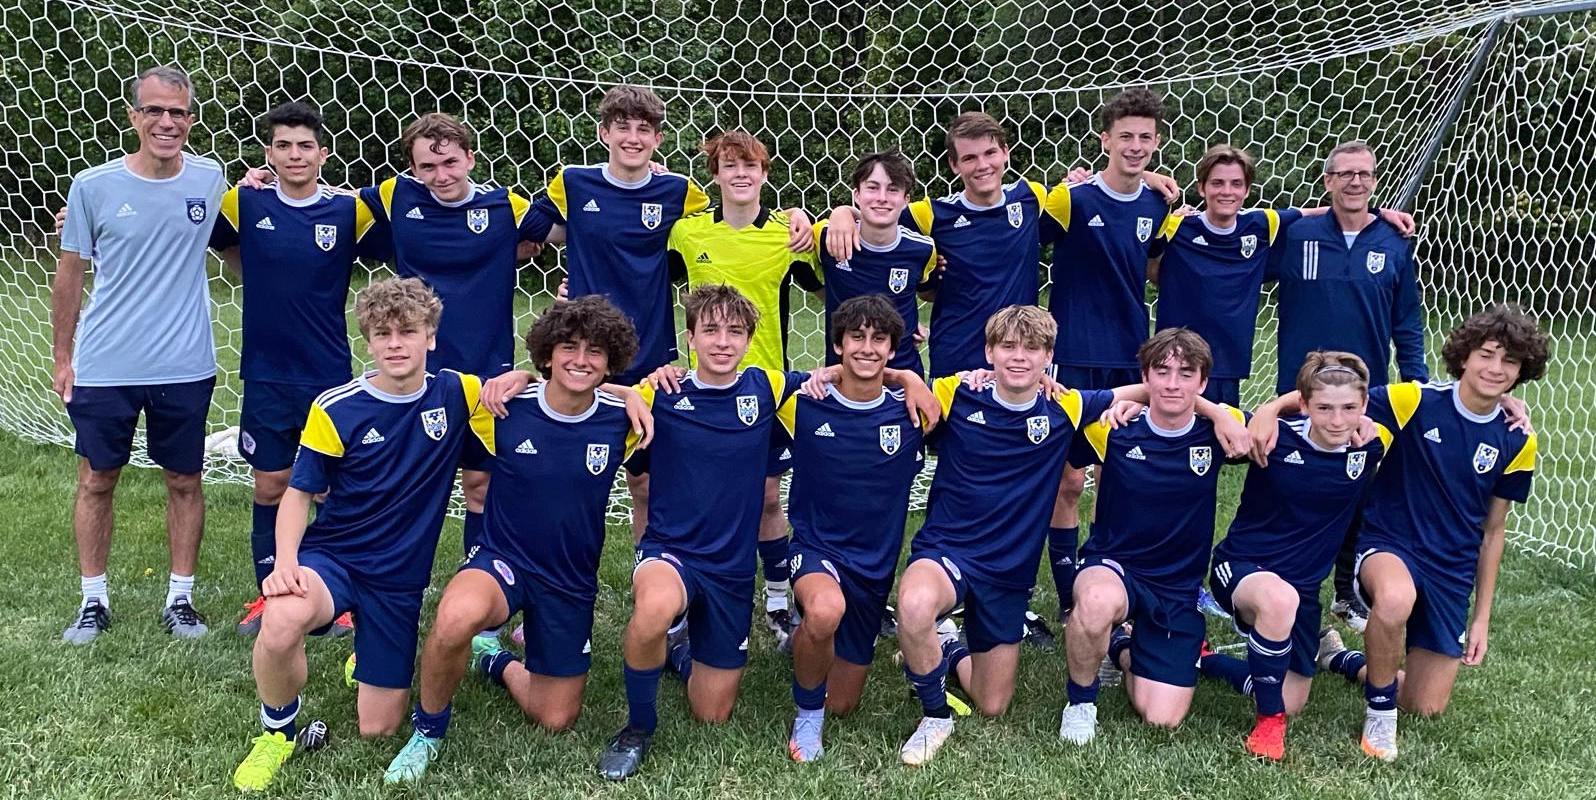 Victory '06 boys win EDP Premier IV League with a perfect 8-0 record